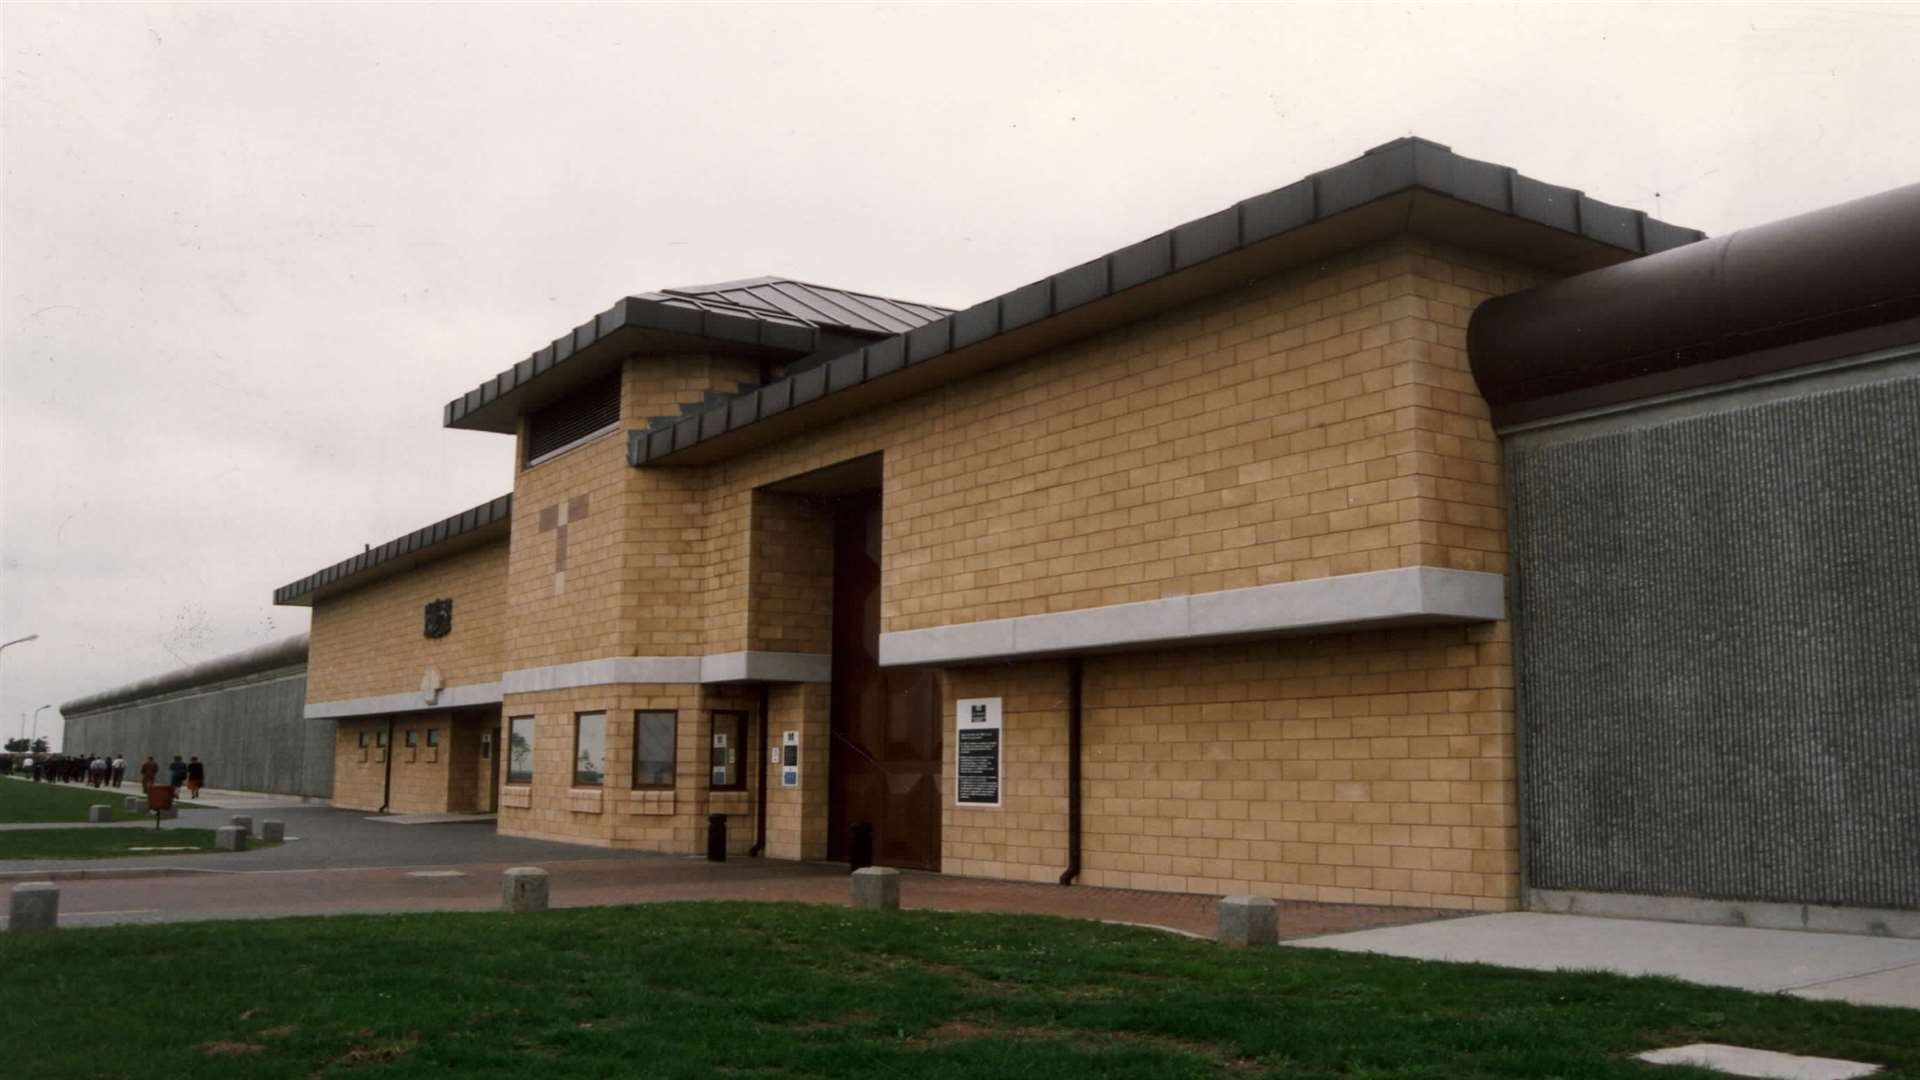 Elmley Prison on the Isle of Sheppey